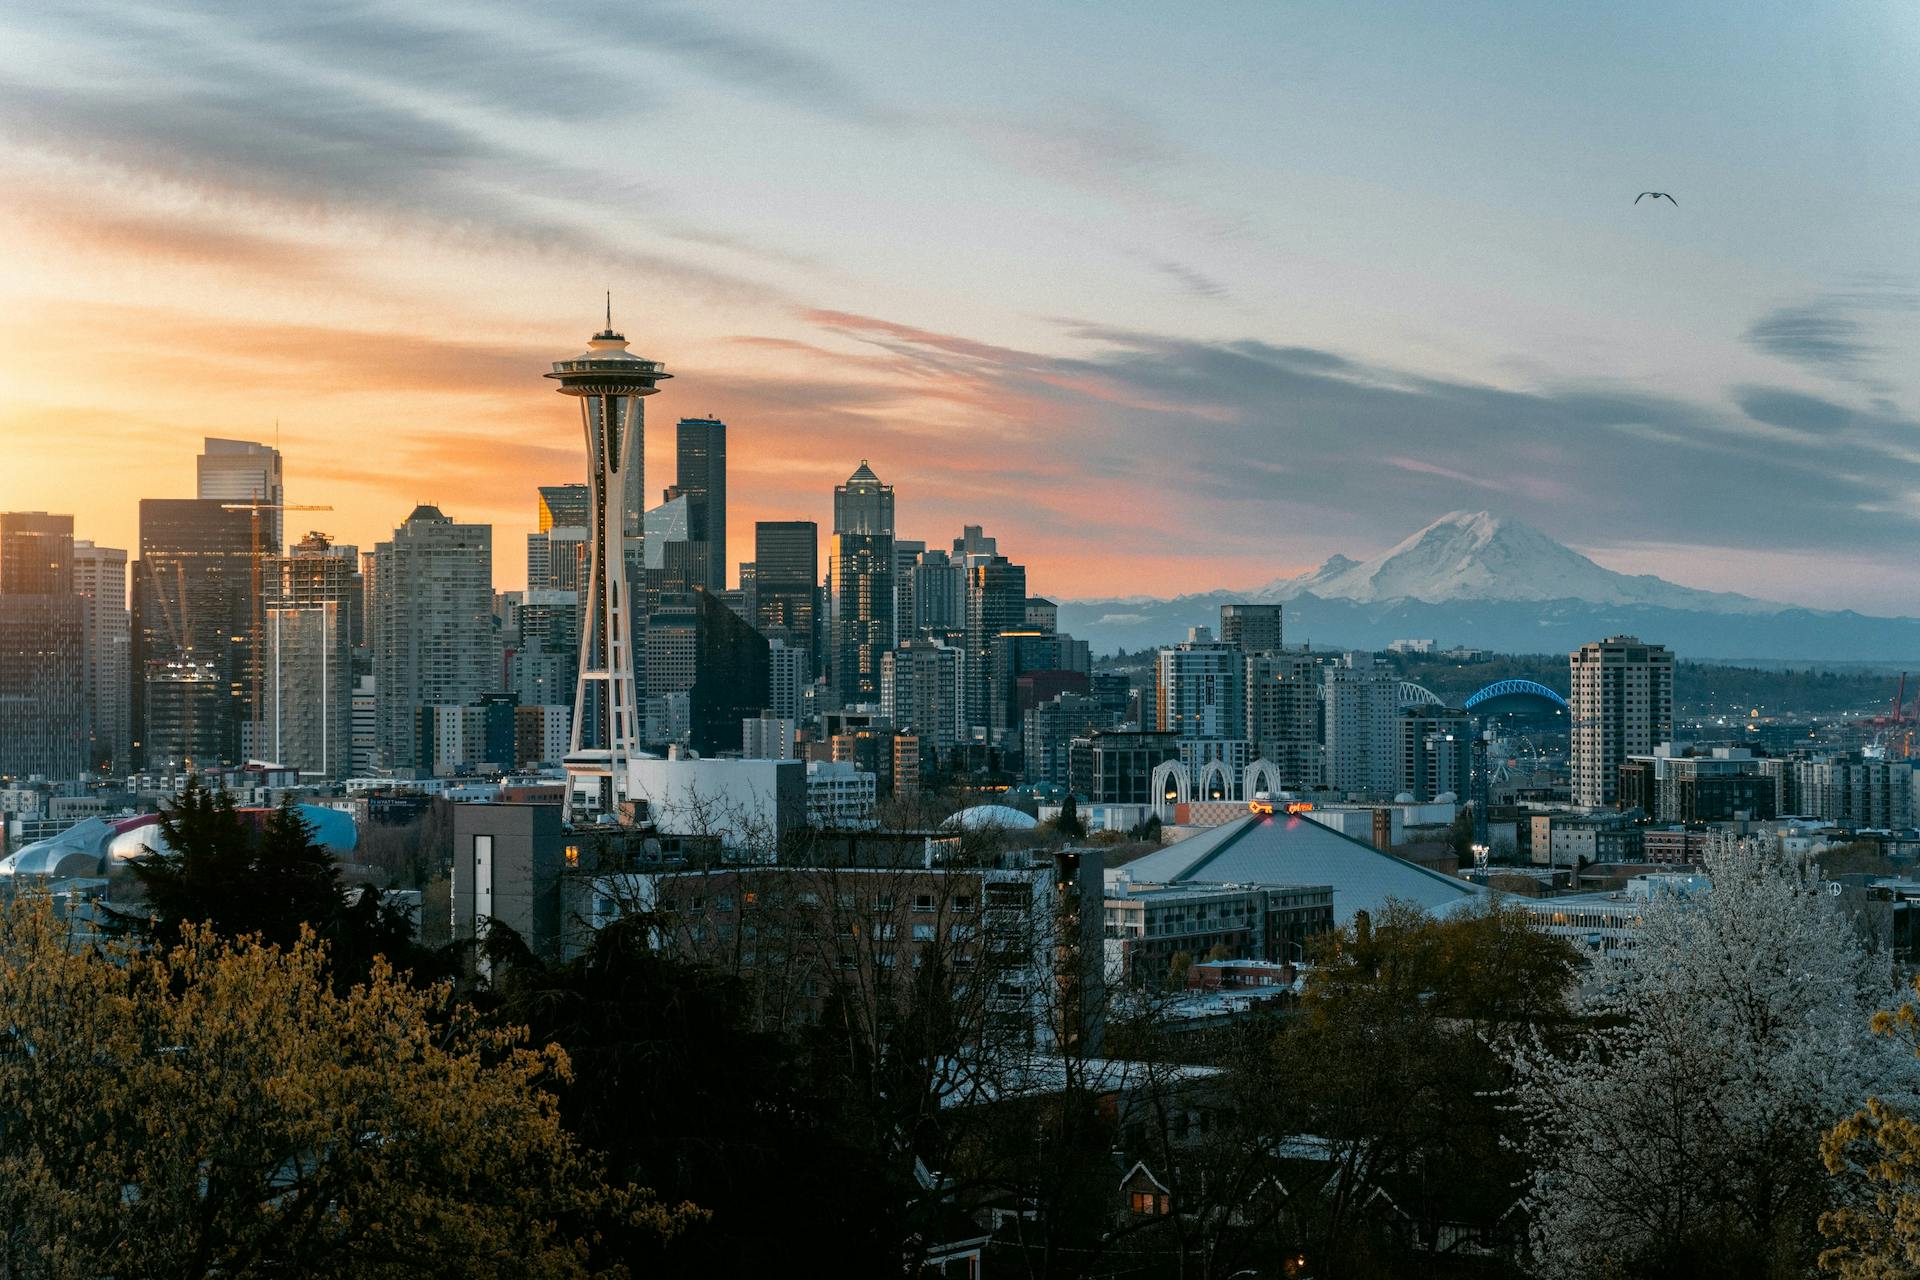 A sunset landscape photo of Seattle’s skyline from Kerry Park with downtown on the left and Mount Rainier on the right in the distance.